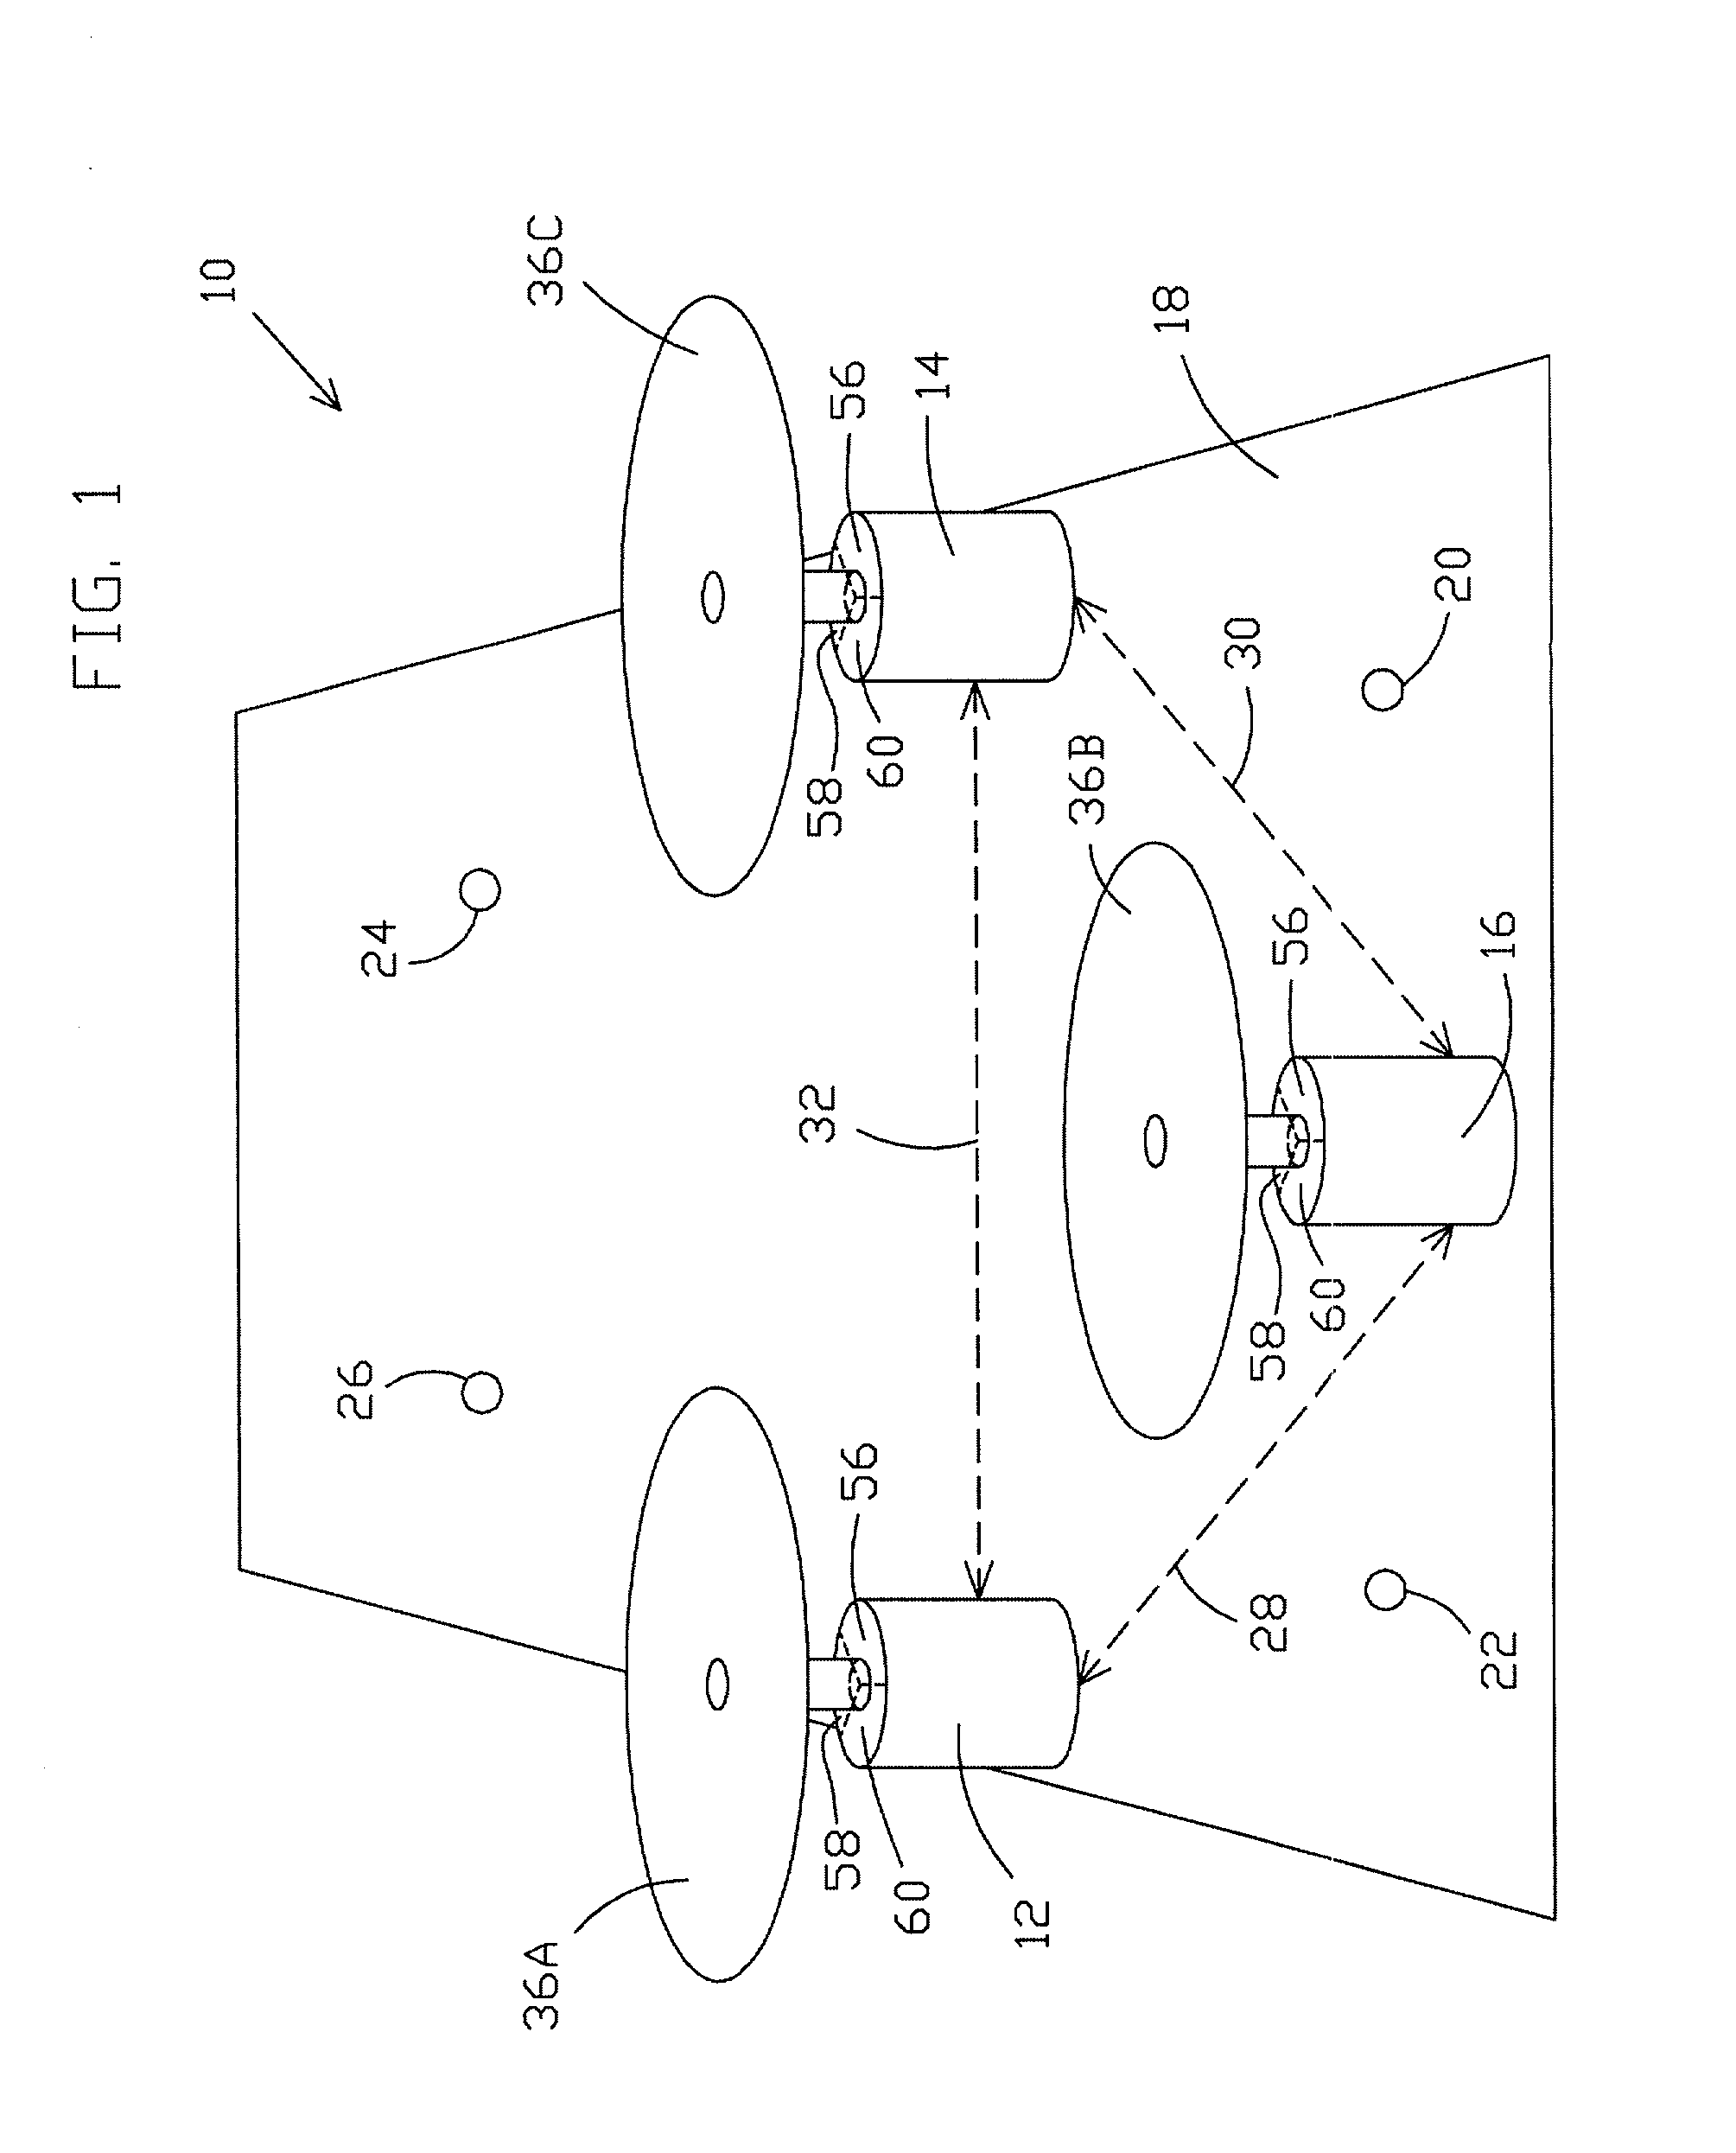 System and method for measuring short distances